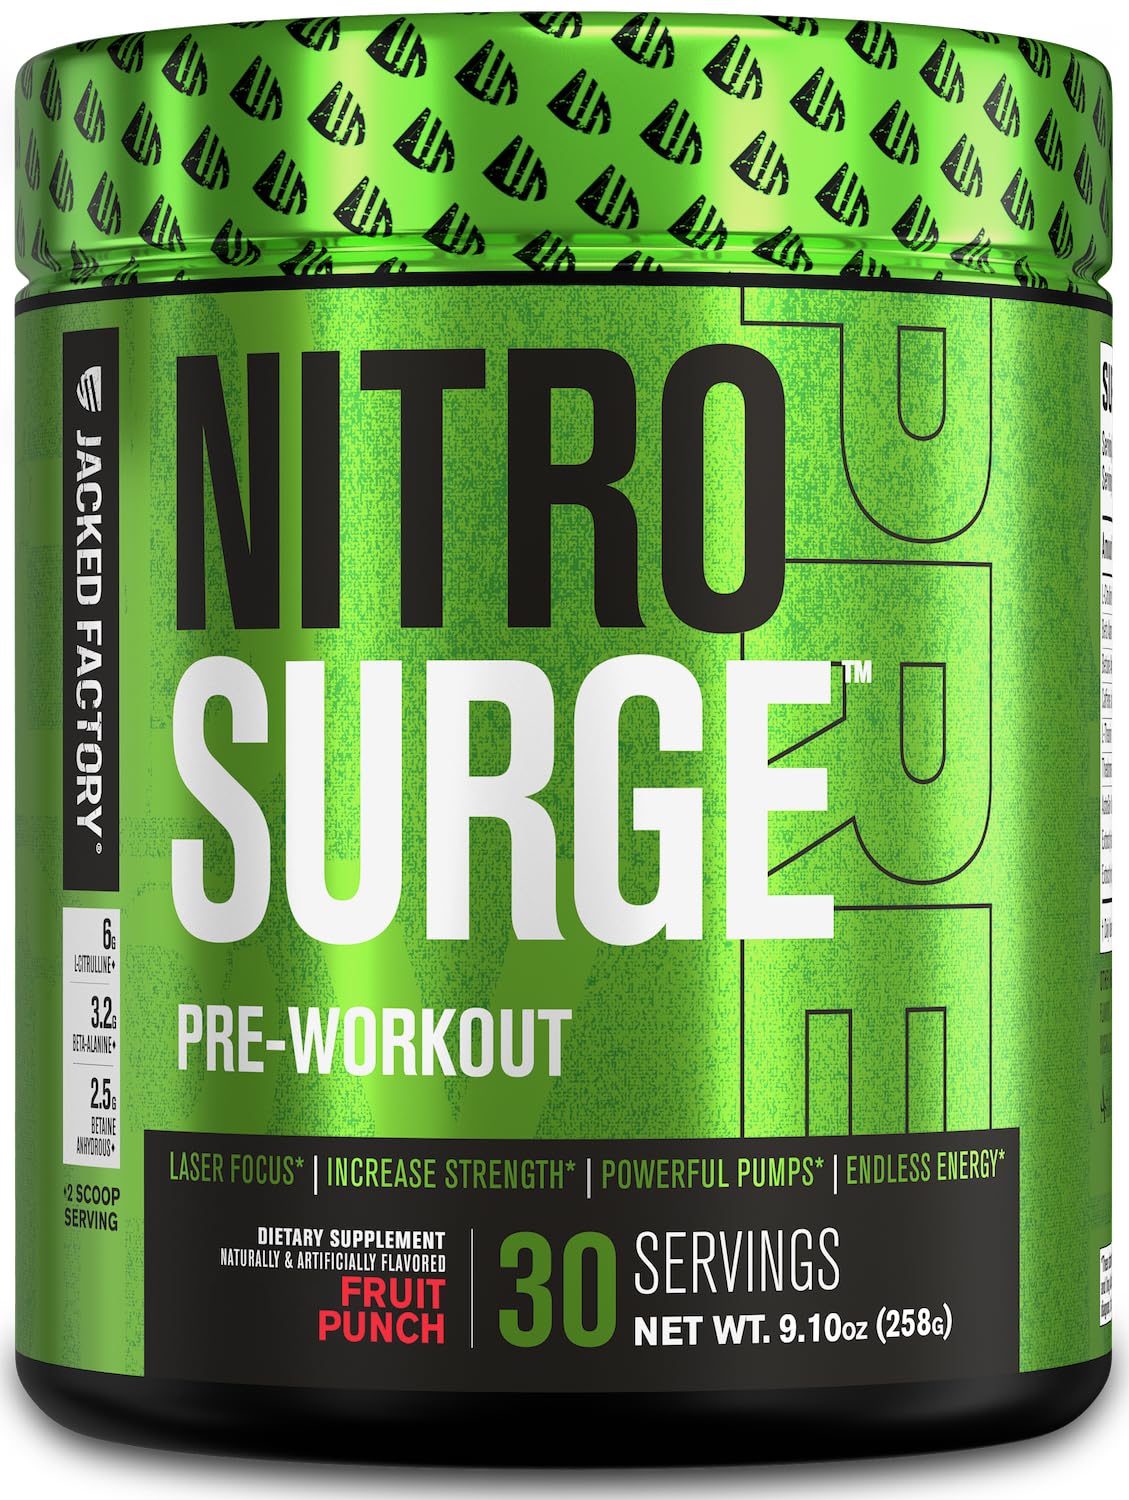 Jacked Factory NITROSURgE Pre Workout Supplement - Endless Energy, Instant Strength gains, clear Focus, Intense Pumps - Nitric Oxide Booster & 